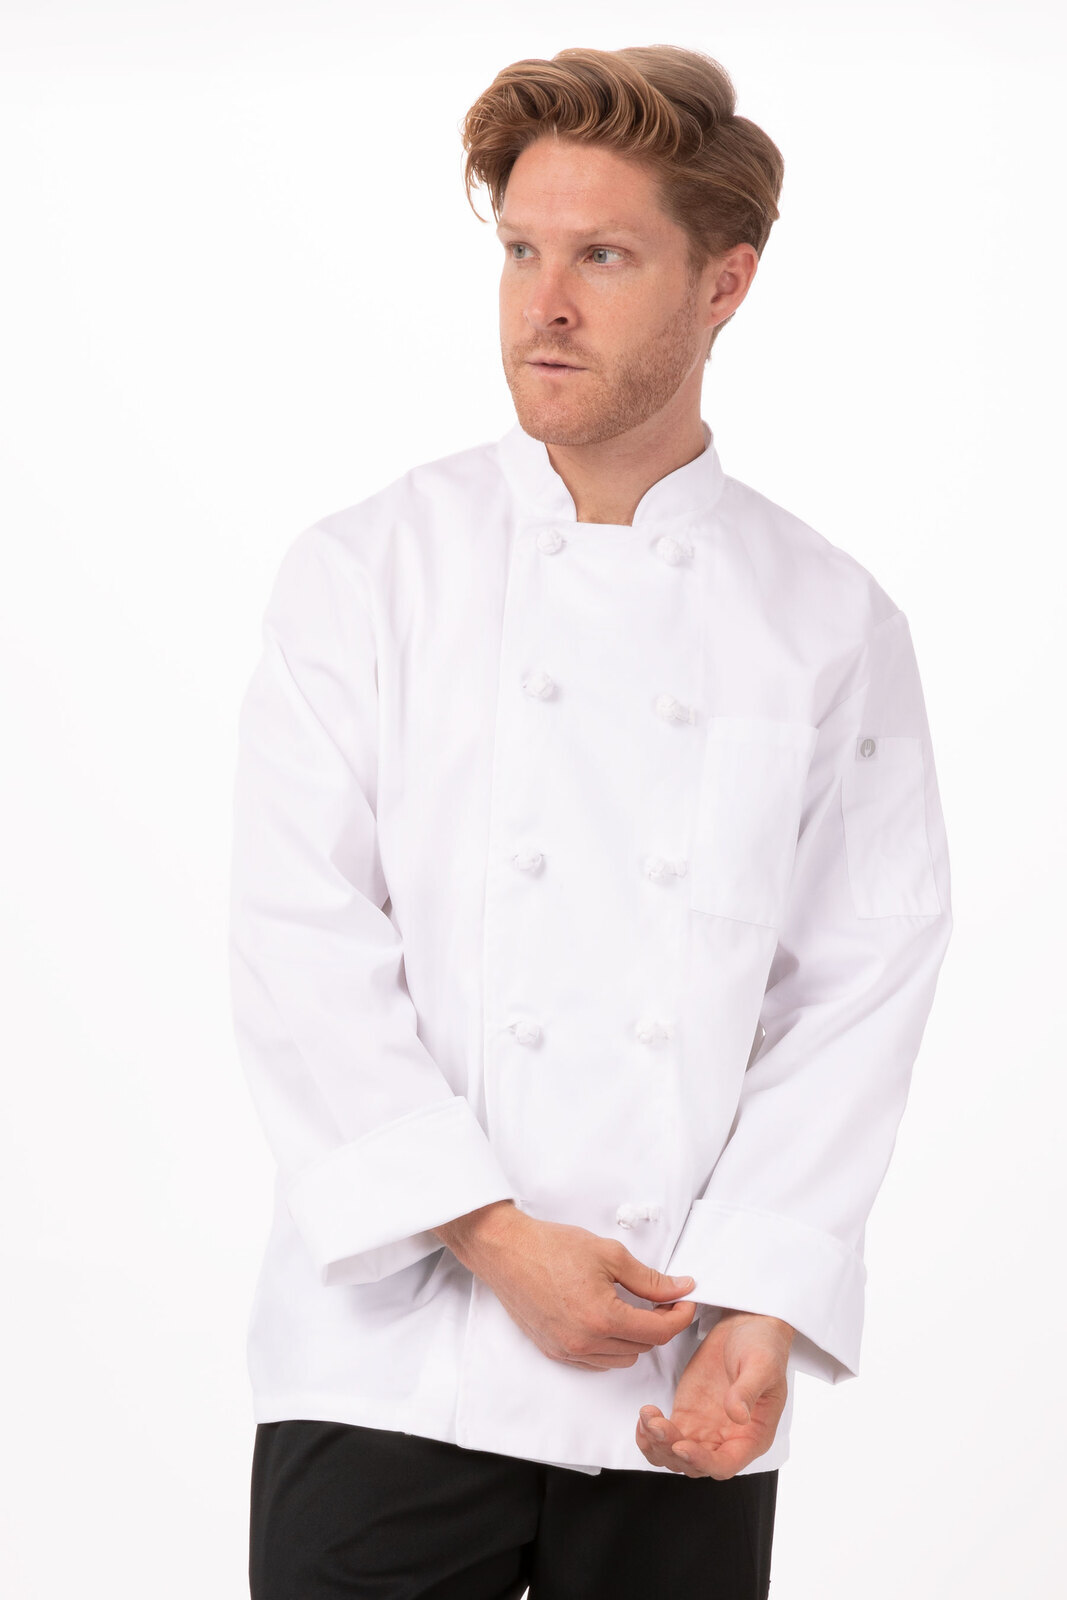  Chef  Works Australia Culinary Wear Clothing and 